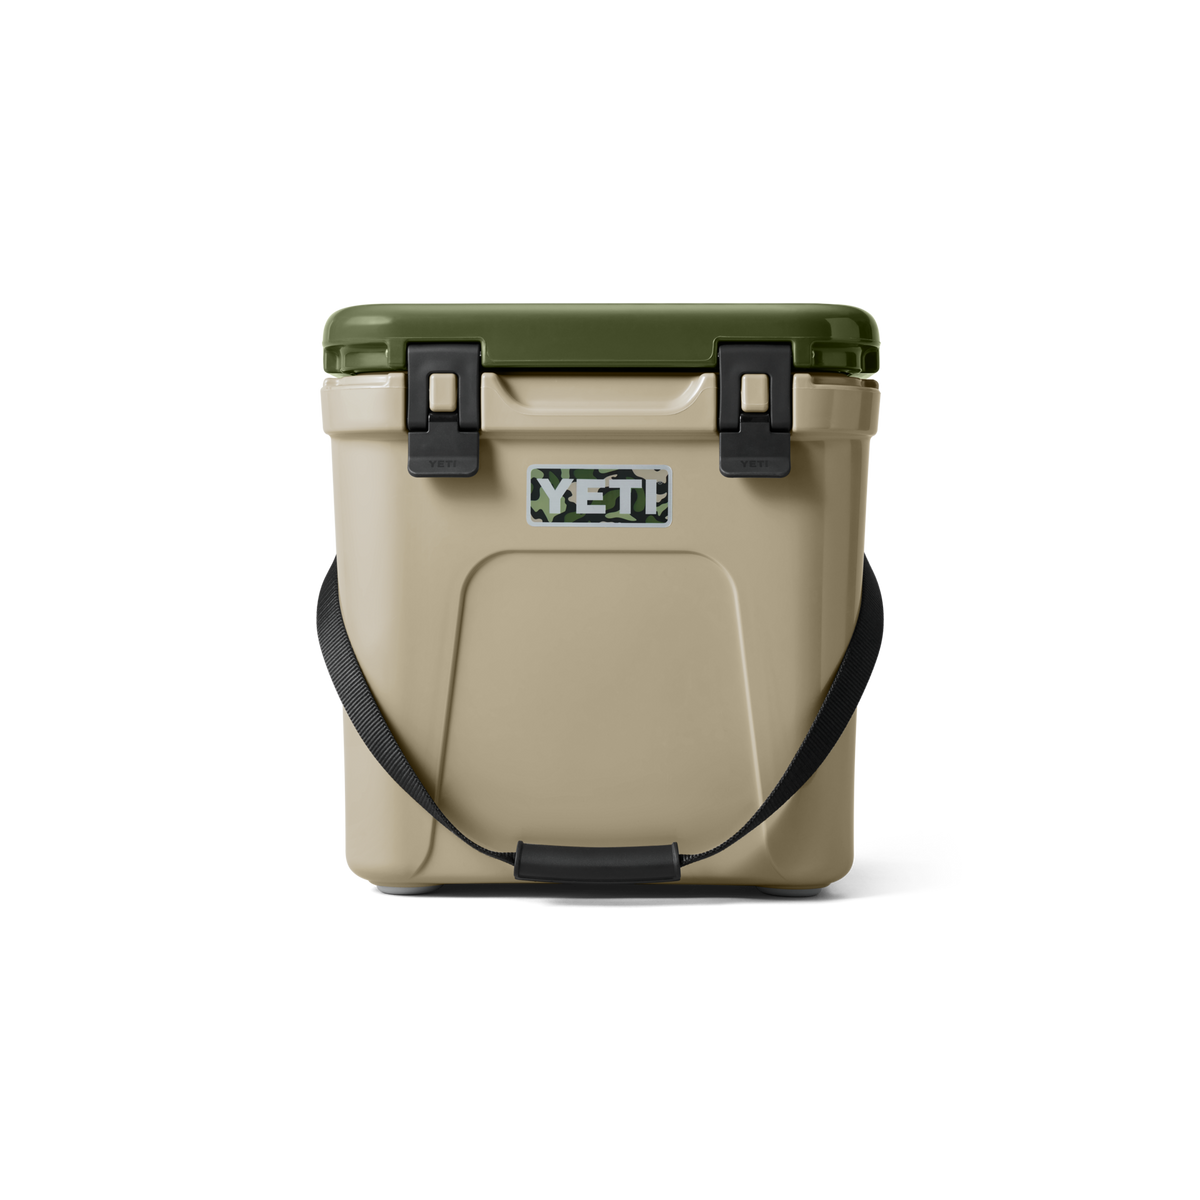 Yeti, Roadie, Cooler, Hard Cooler, Limited, Decoy, Hunting, Camo, Limited Edition